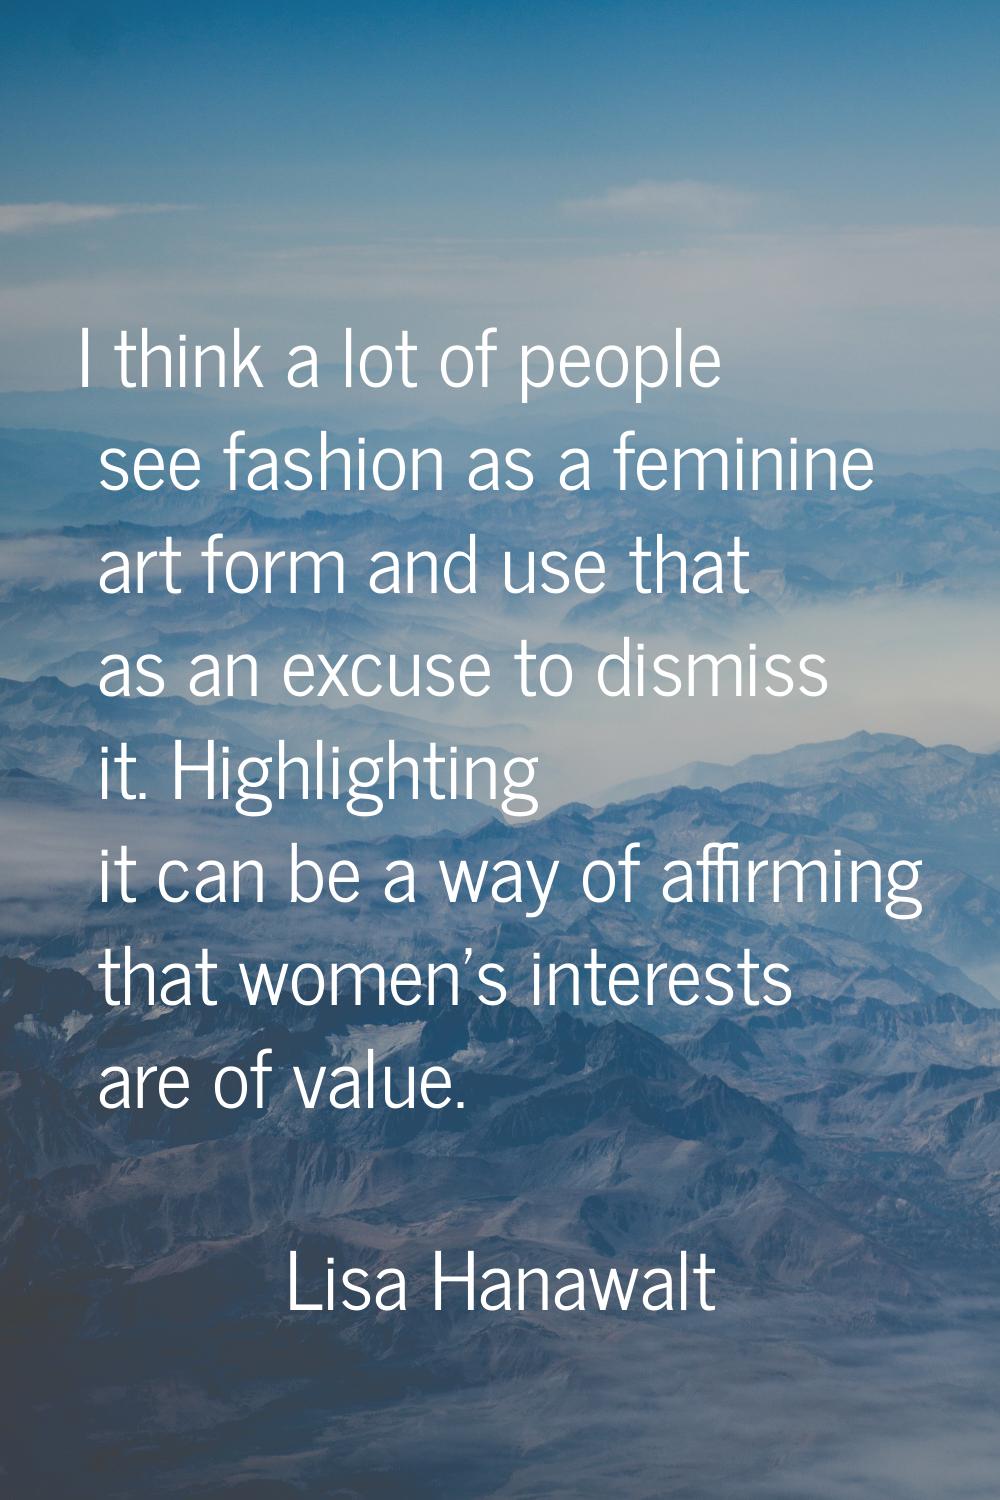 I think a lot of people see fashion as a feminine art form and use that as an excuse to dismiss it.